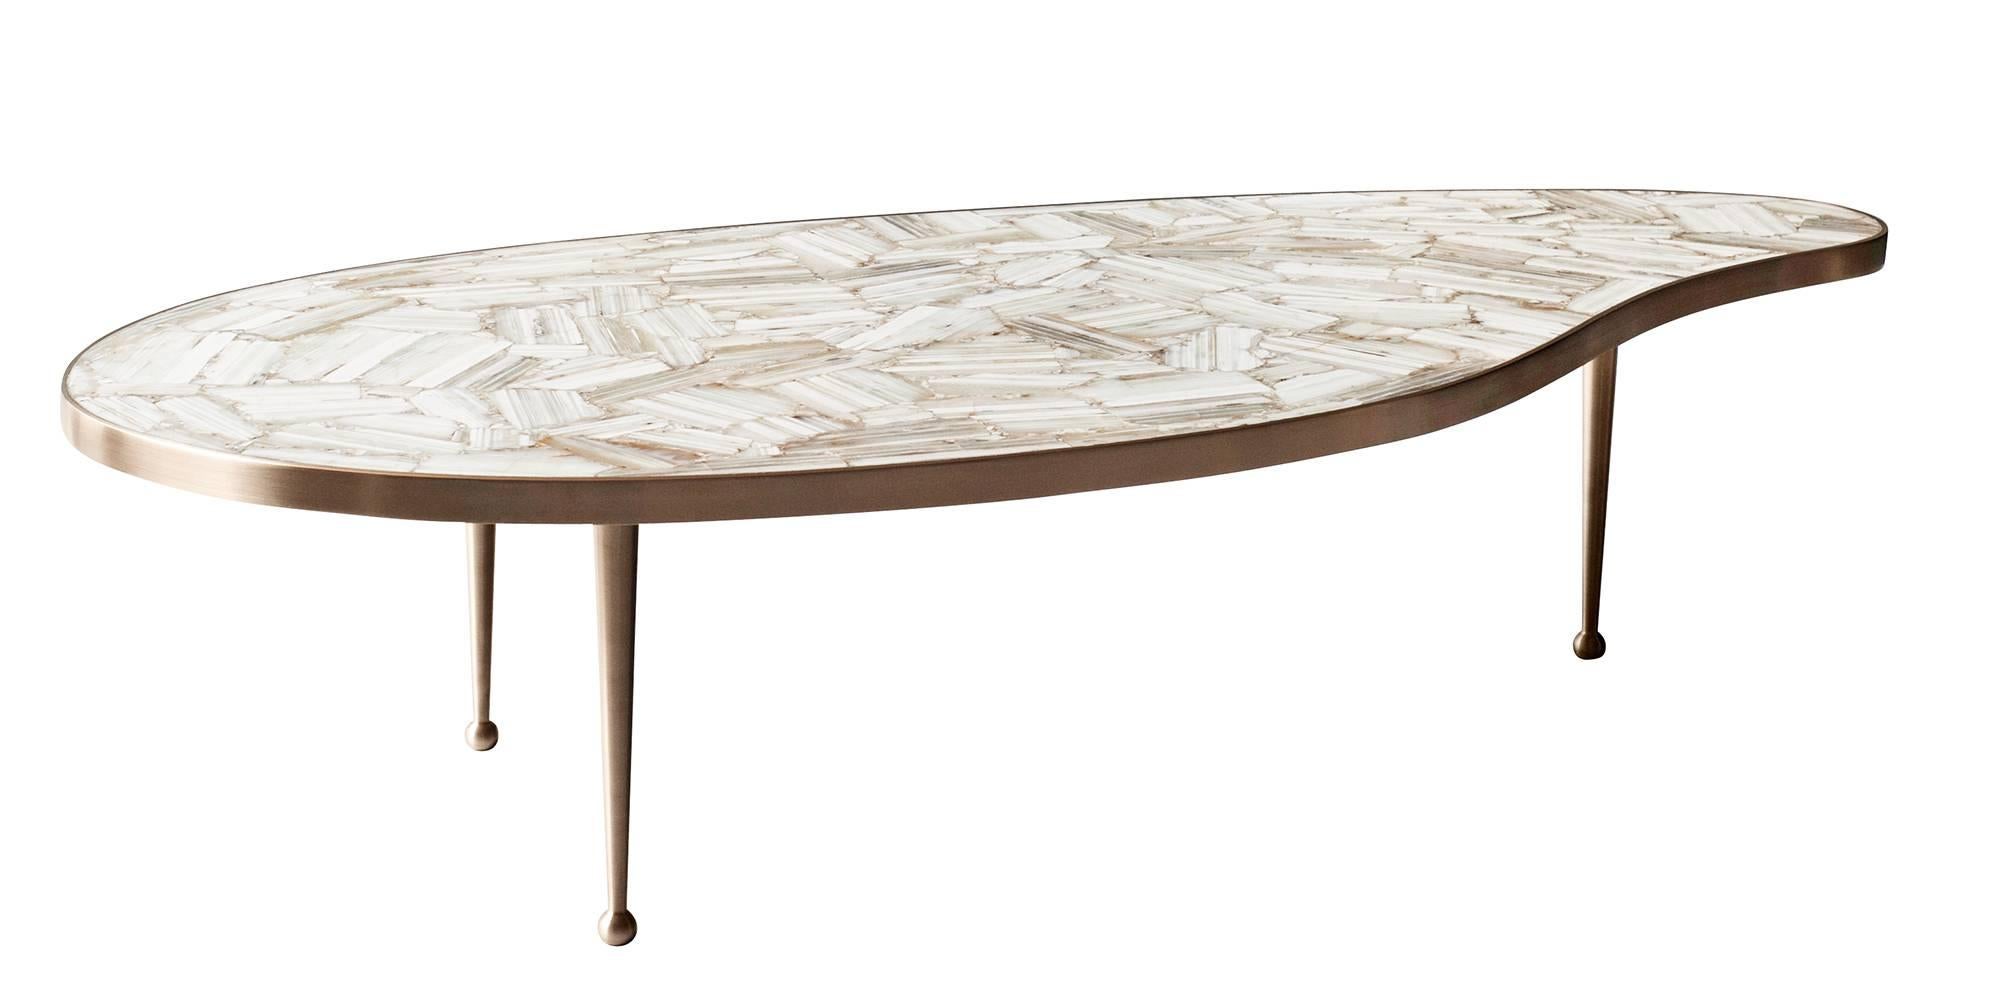 The bio-morphic shape and clean lines of the Lola coffee table by DeMuro Das were inspired by midcentury design. With a stone top made of polished, hand-laid creamy white agate, the table surface is both luxurious and functional. Hand-cast, solid